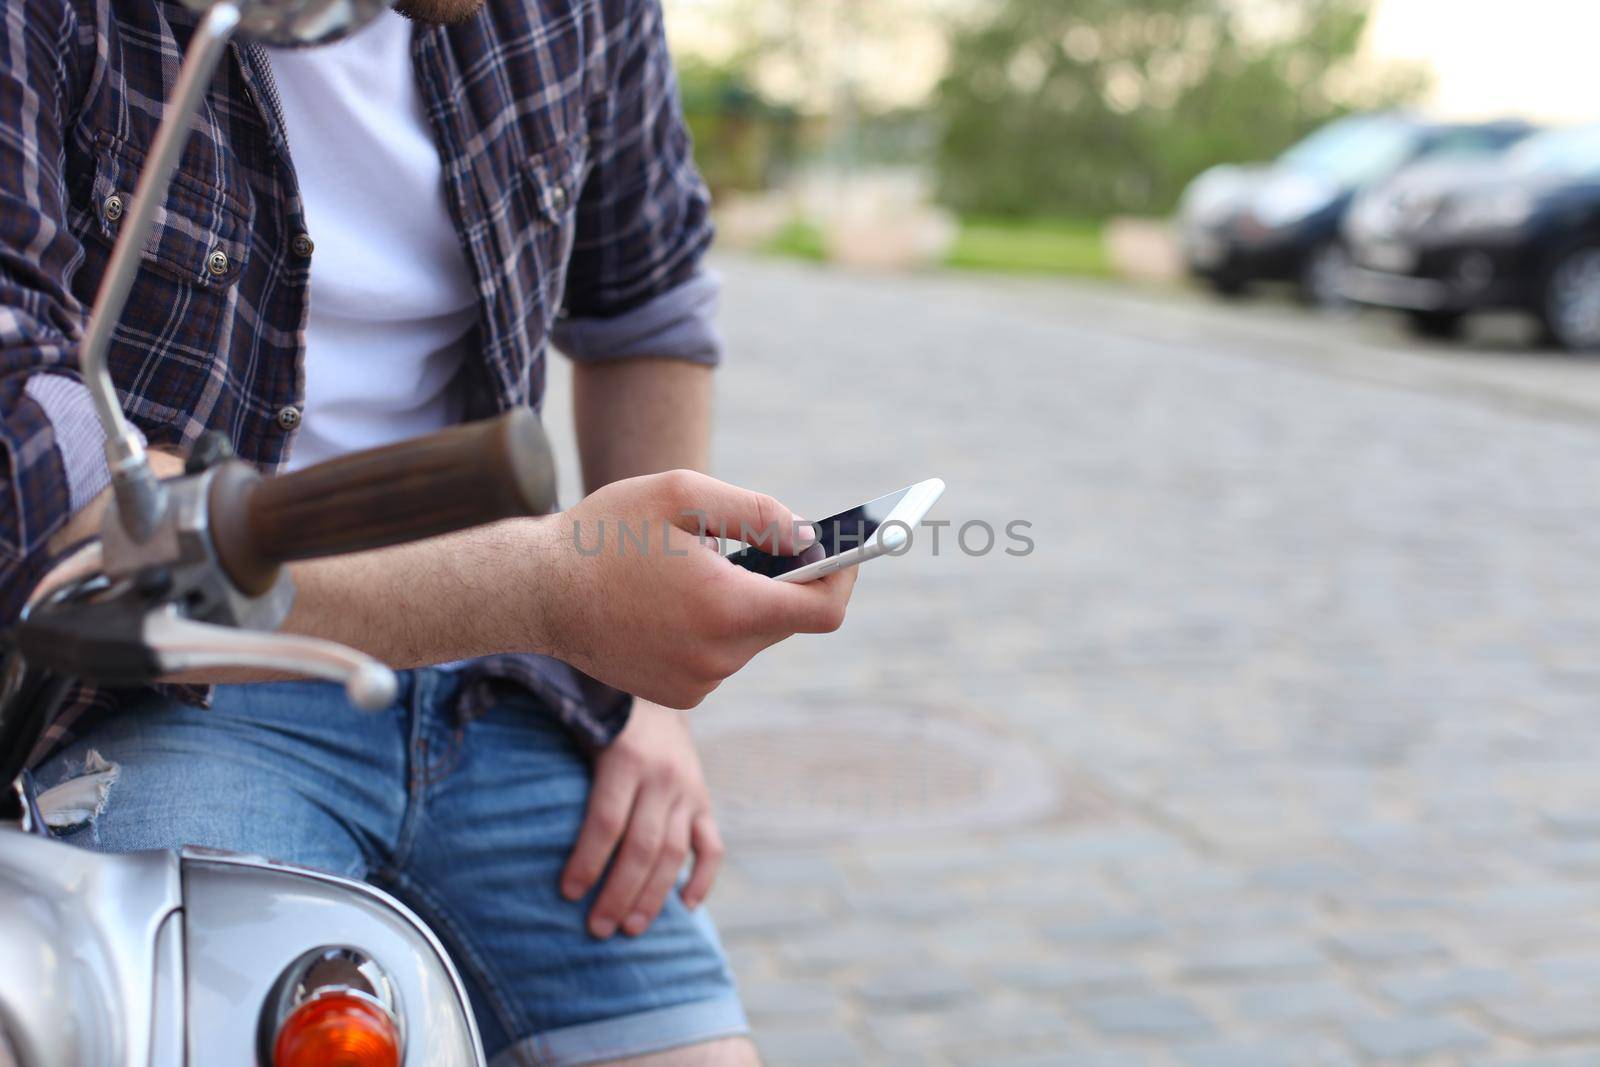 Young man sitting on scooter and using smart phone